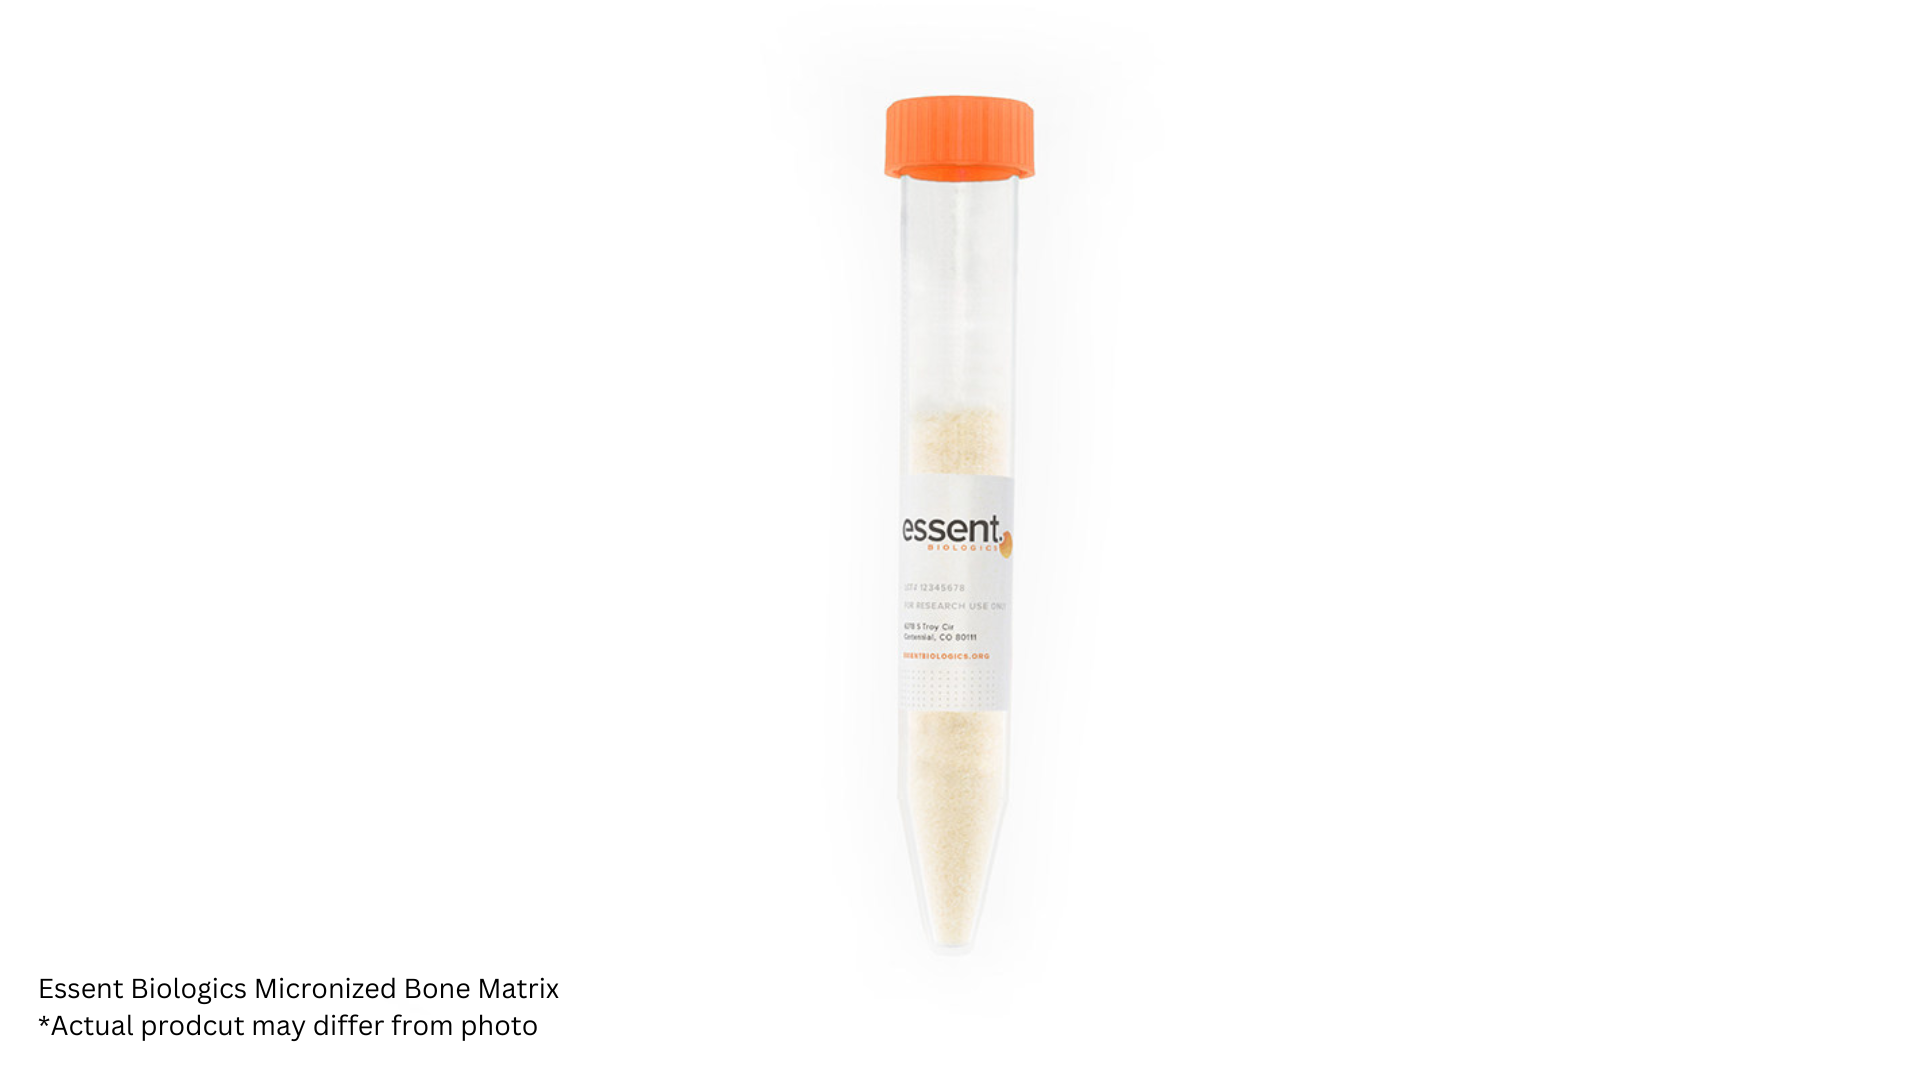 Essent Biologics™ announced availability of its Micronized Bone Matrix (MBM) for 3D bioprinting and tissue engineering applications.